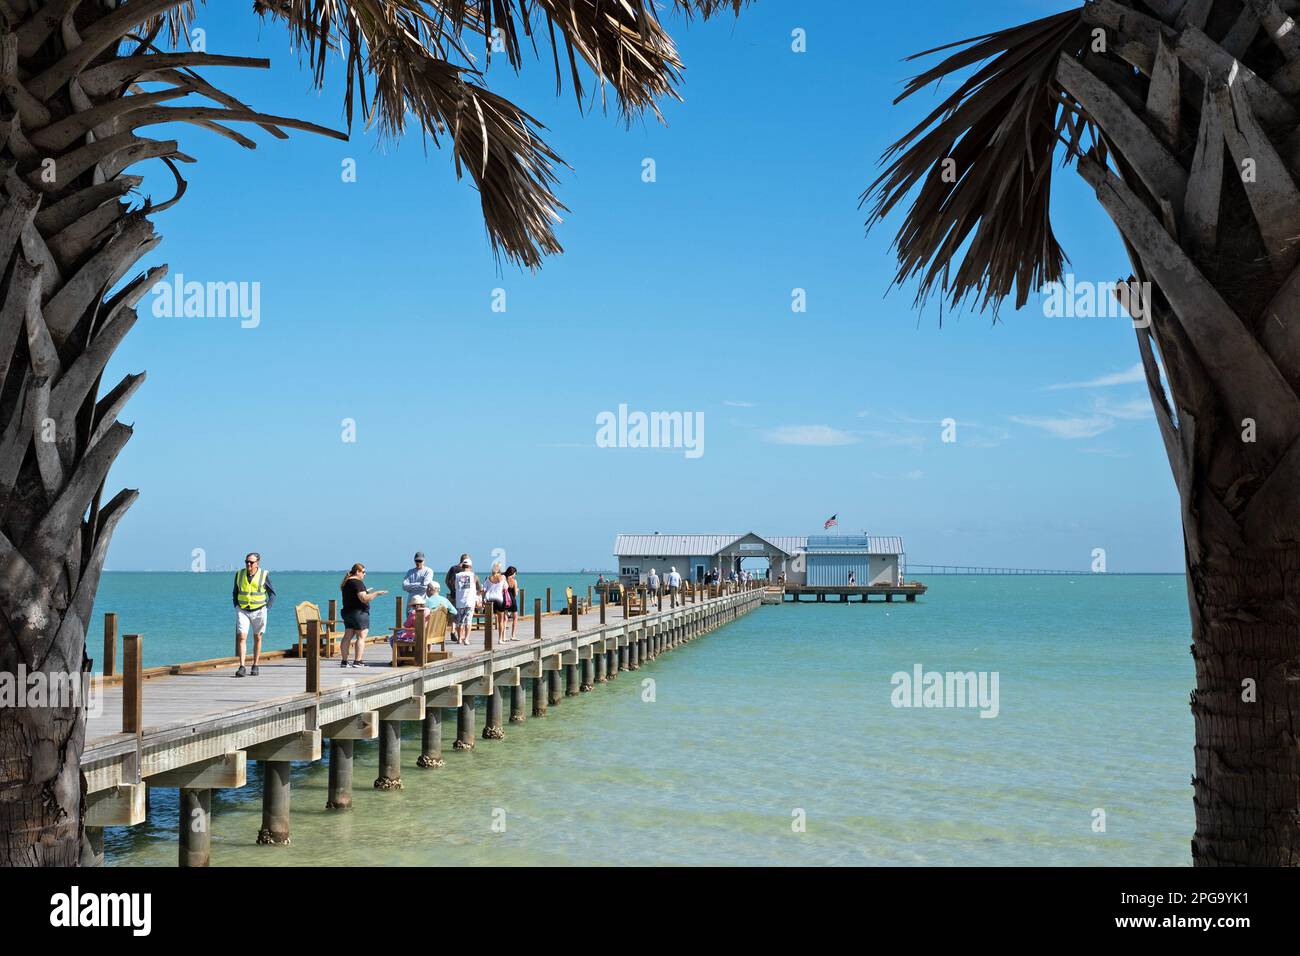 City Pier on Anna Maria Island, Florida, USA was rebuilt and opened in 2020 after the original pier was destroyed by Hurricane Irma in 2017. Stock Photo